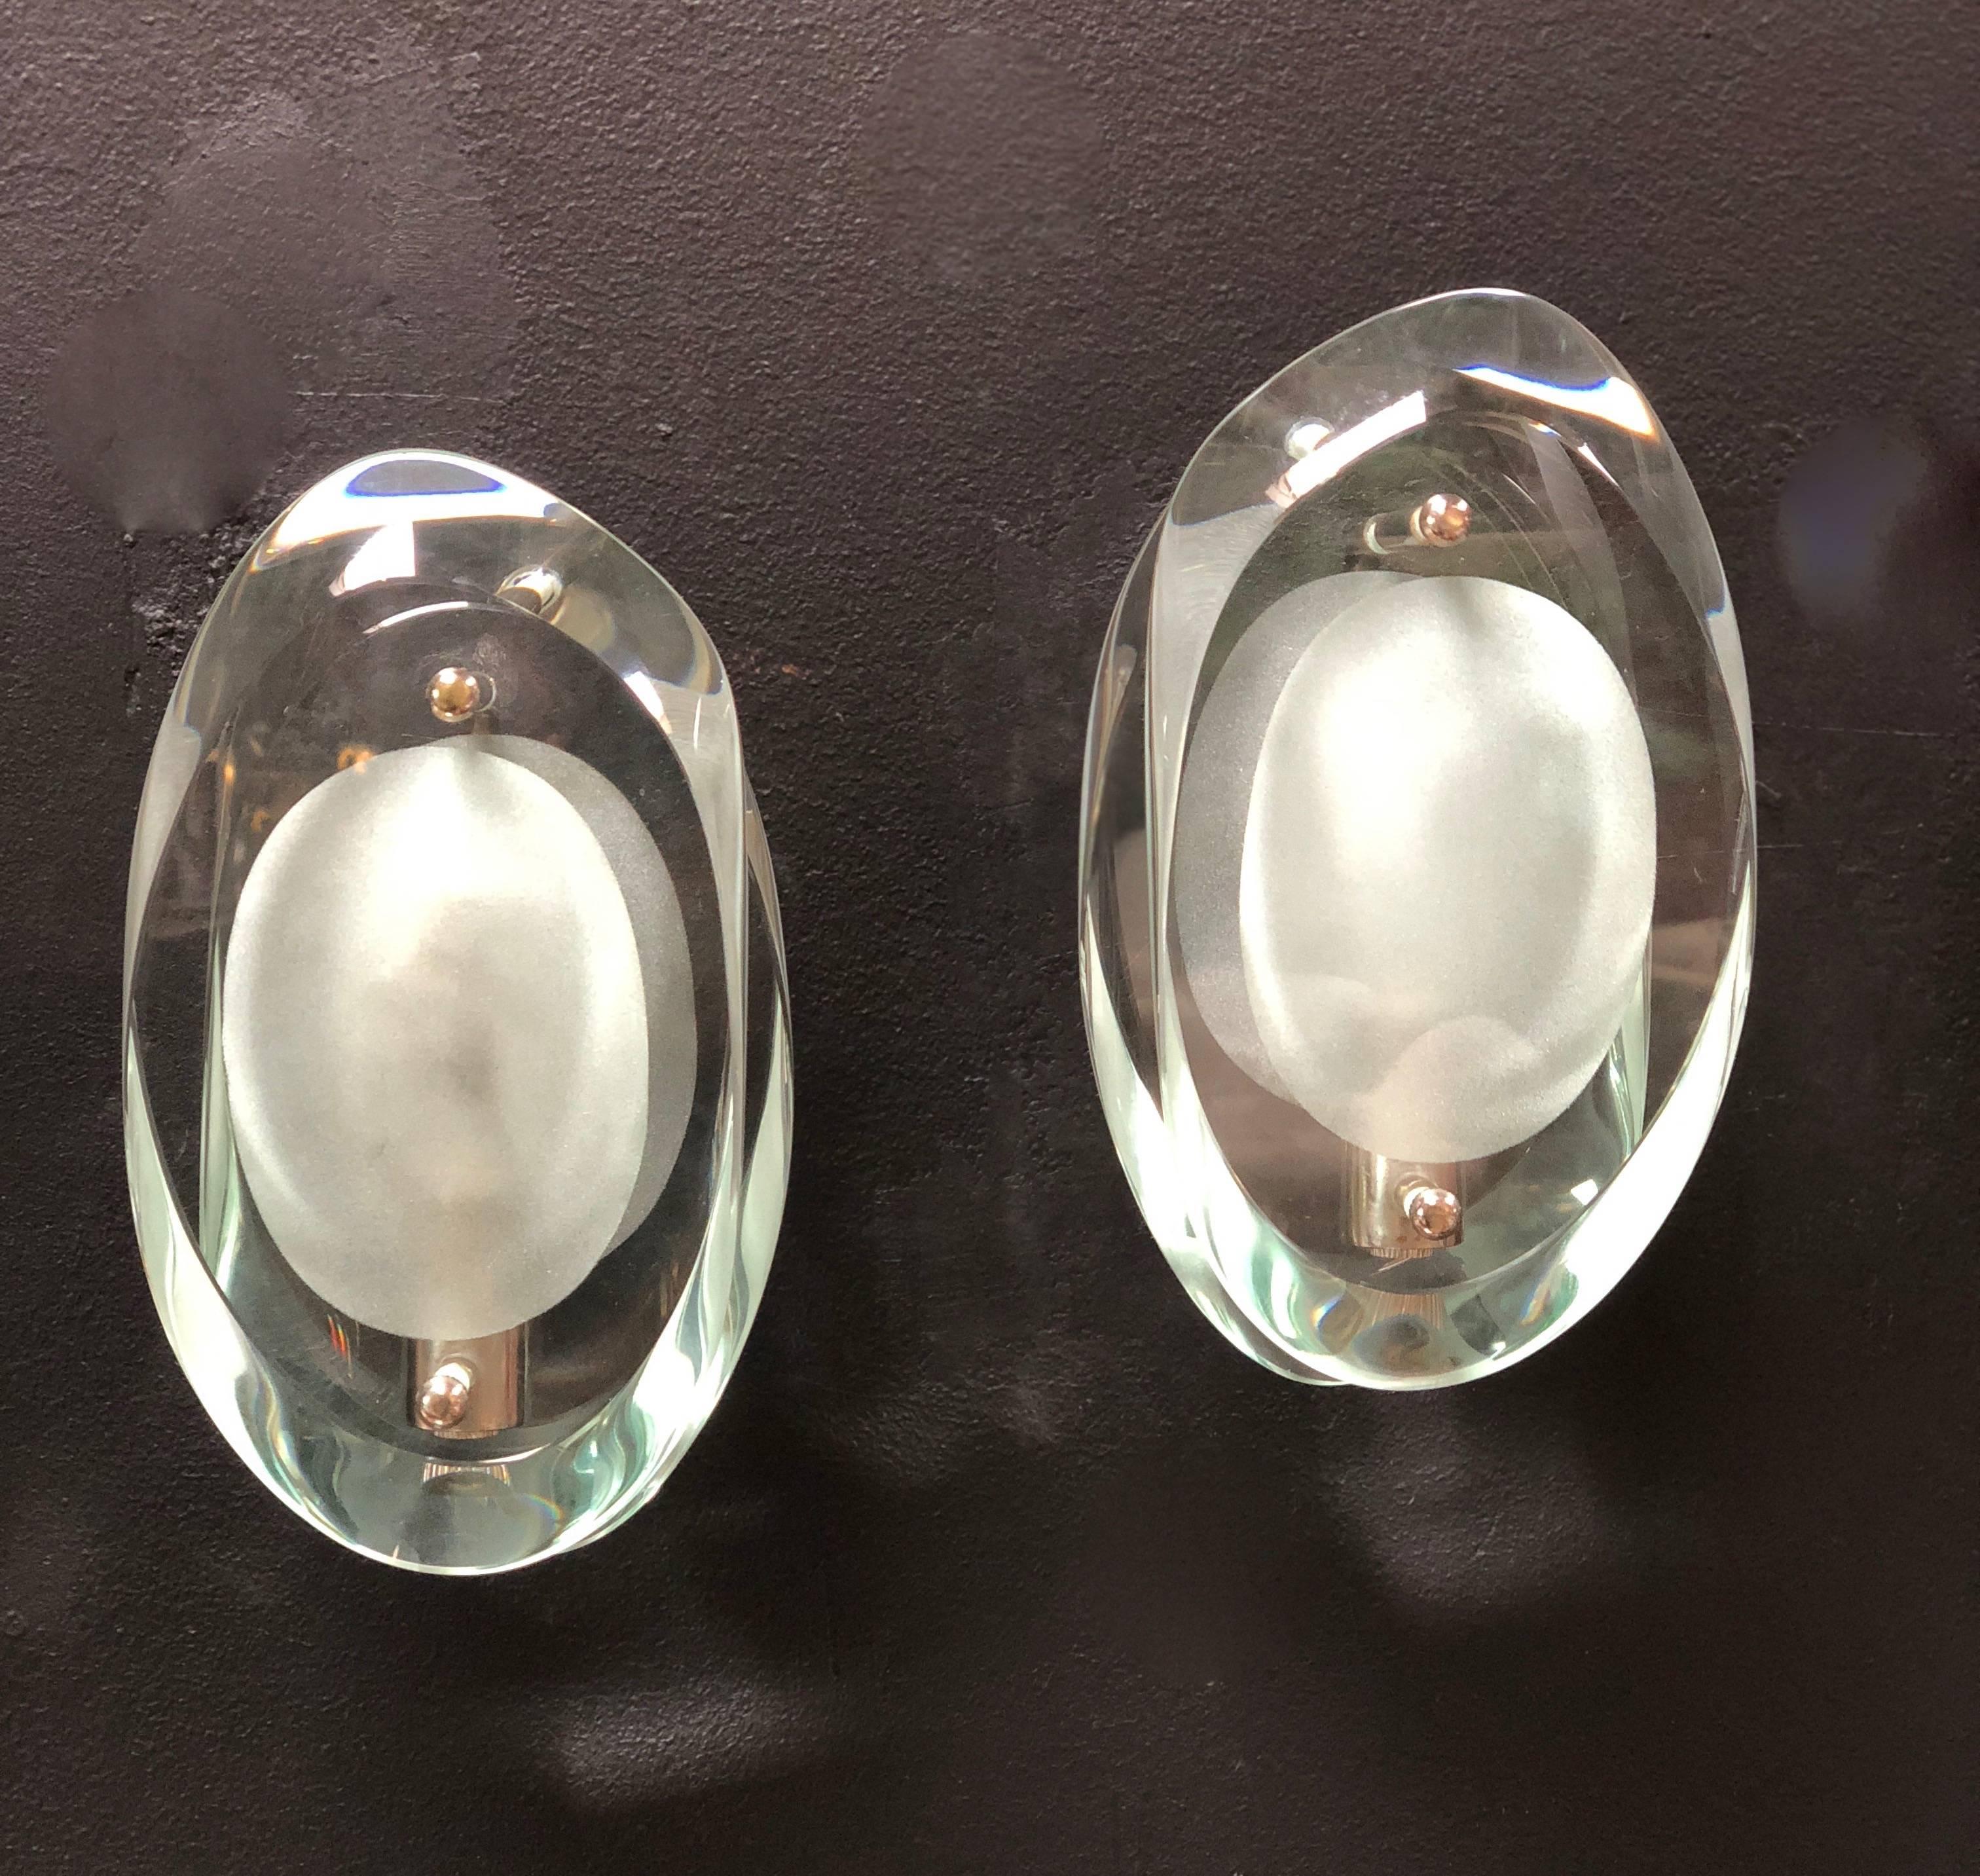 Max Ingrand for Fontana Arte glass sconces wall lamps set of four, Italy, 1960. Double lens cut panels of thick profiled polished glass with etched glass centres. Nickel-plated metal mounts. Excellent condition. The price refer to the pair.